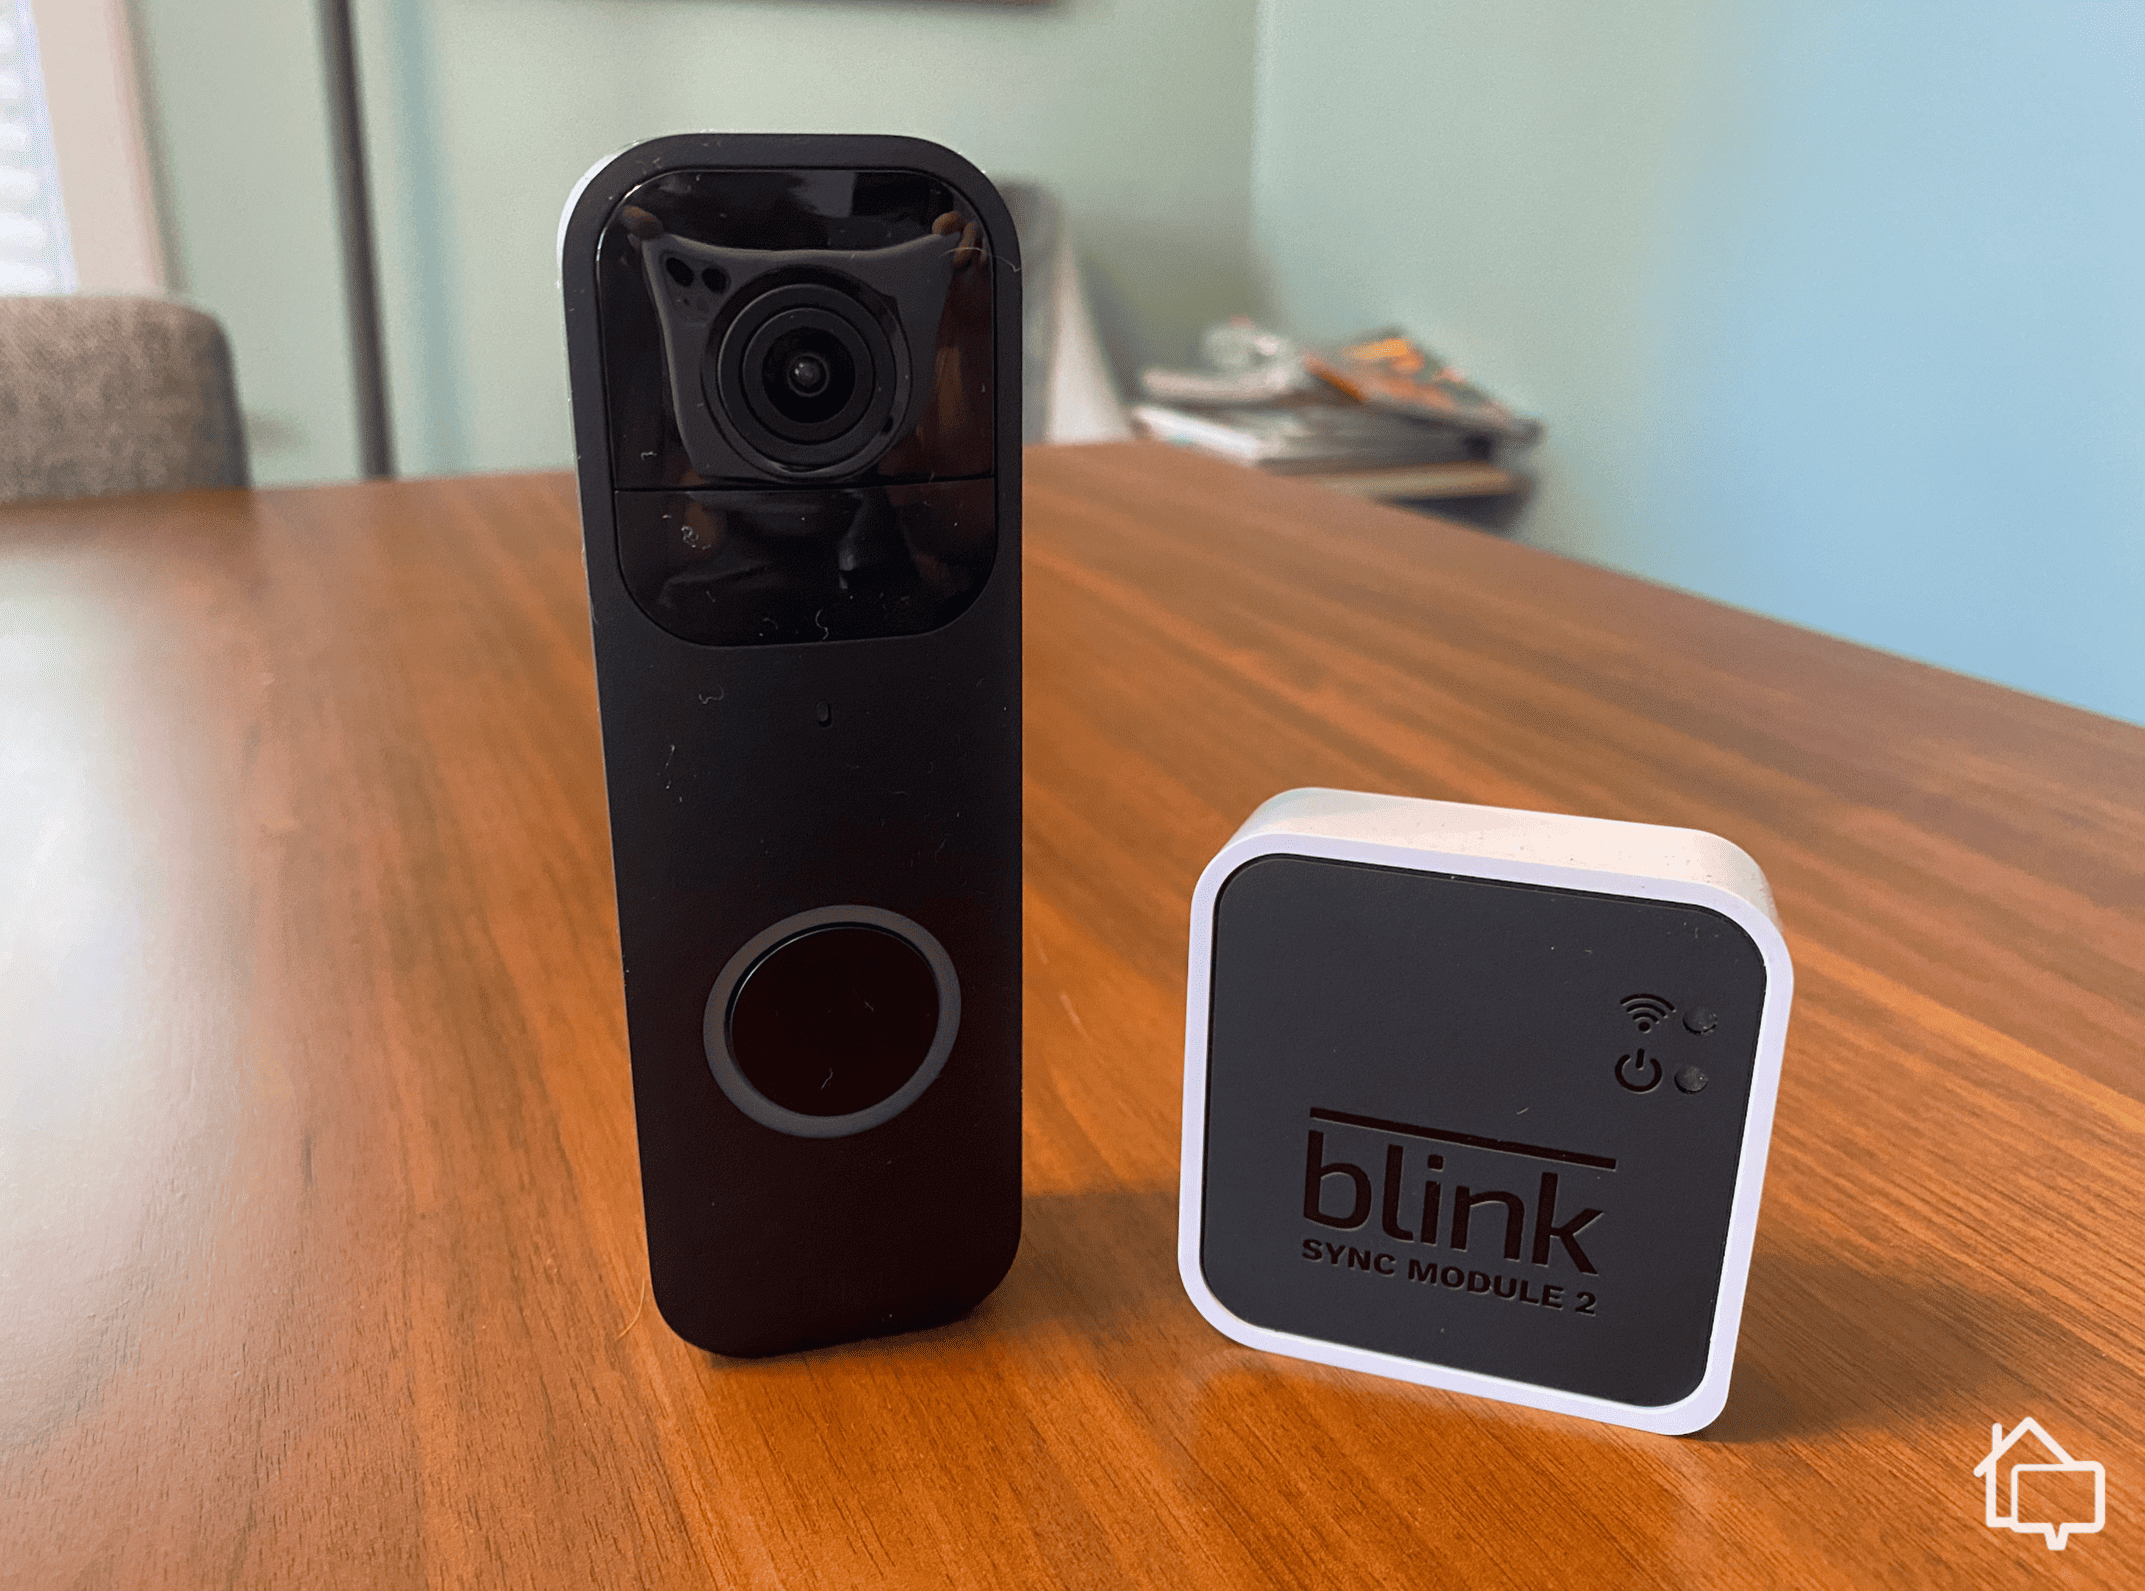 Blink Video Doorbell and the Sync Module 2